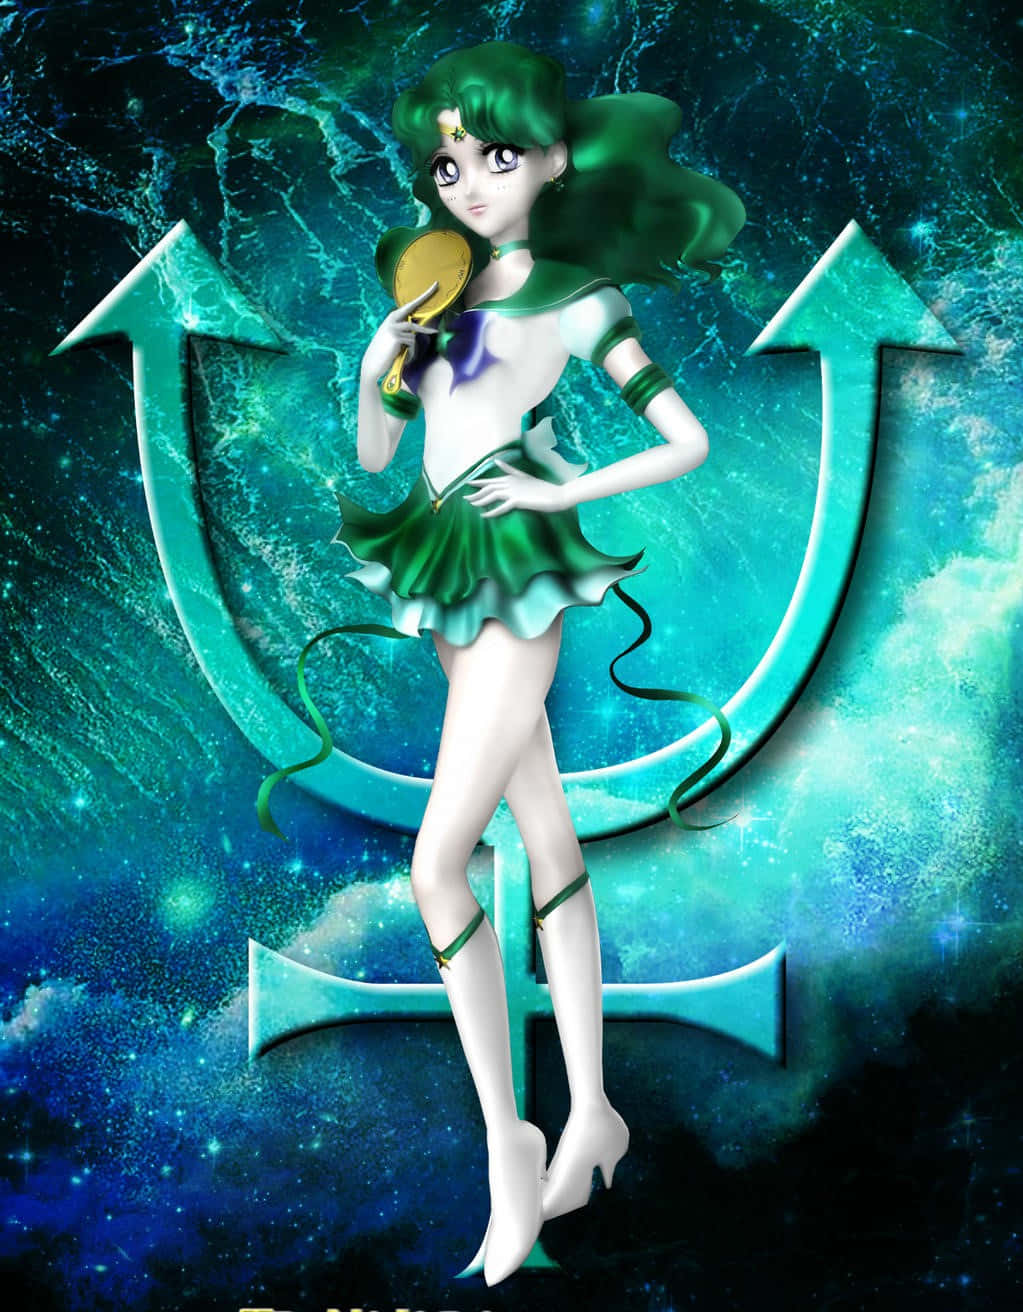 Standing tall and proud, Sailor Neptune stands ready to defend her realm. Wallpaper